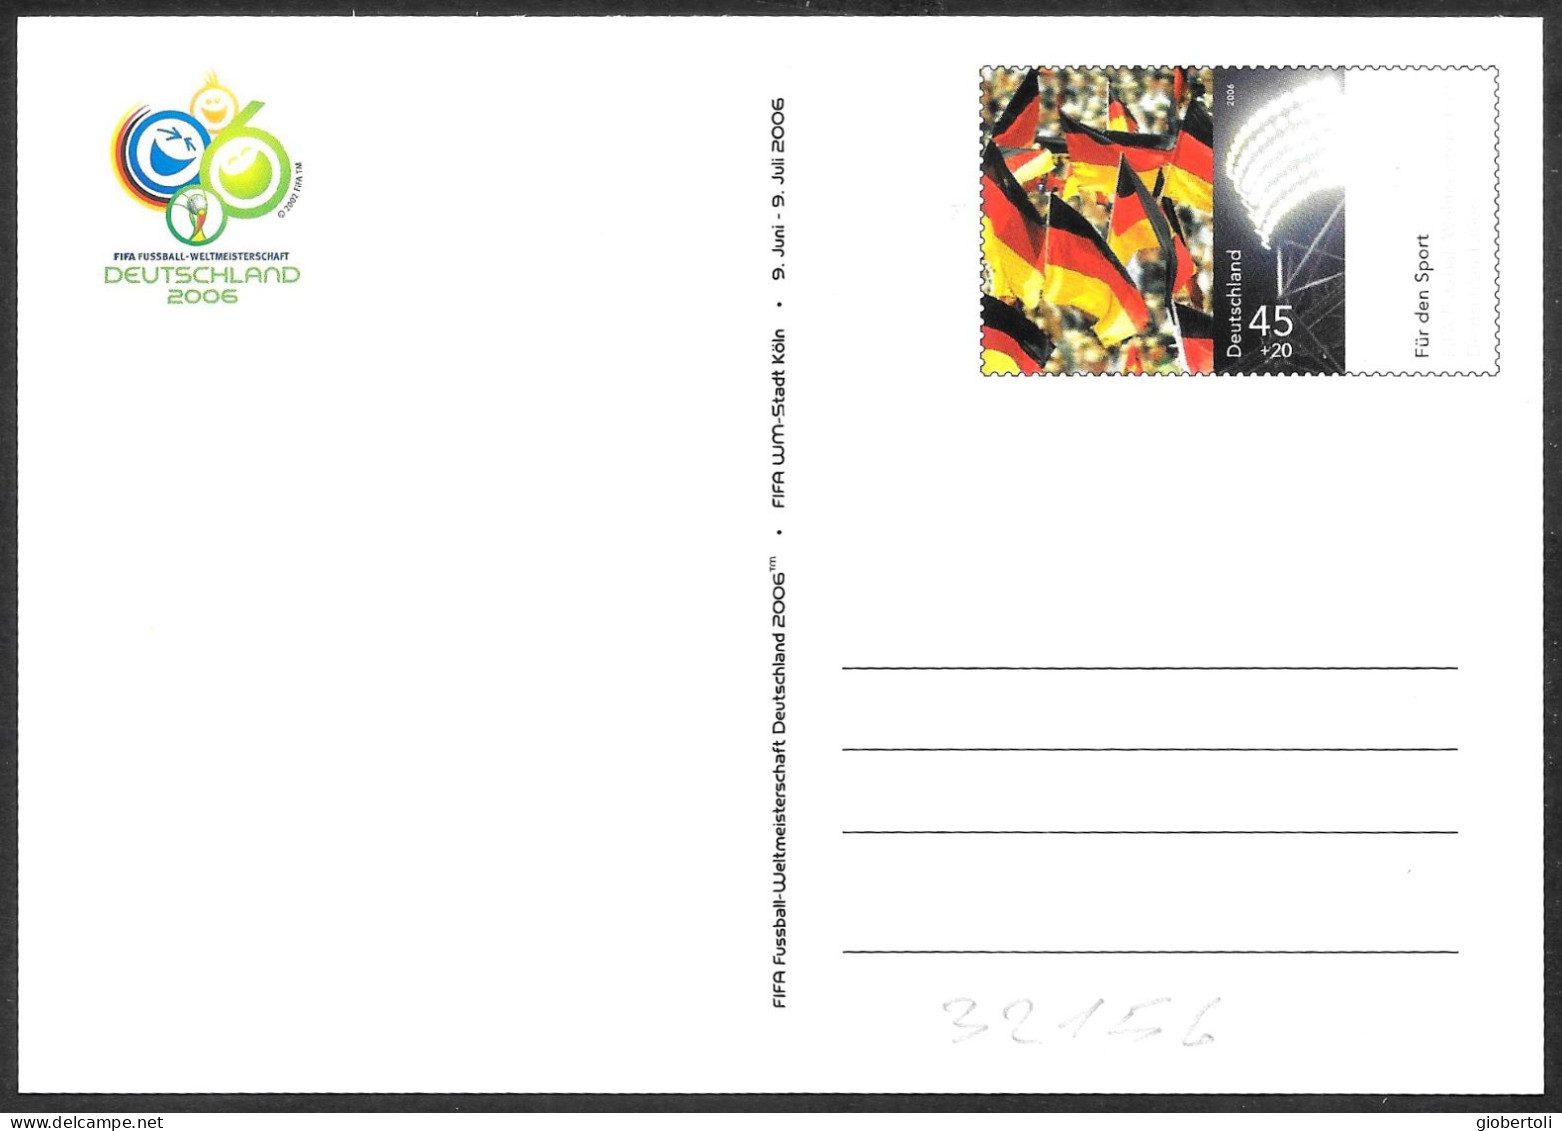 Germania/Germany/Allemagne: Intero, Stationery, Entier, "Germania 2006" - 2006 – Germany